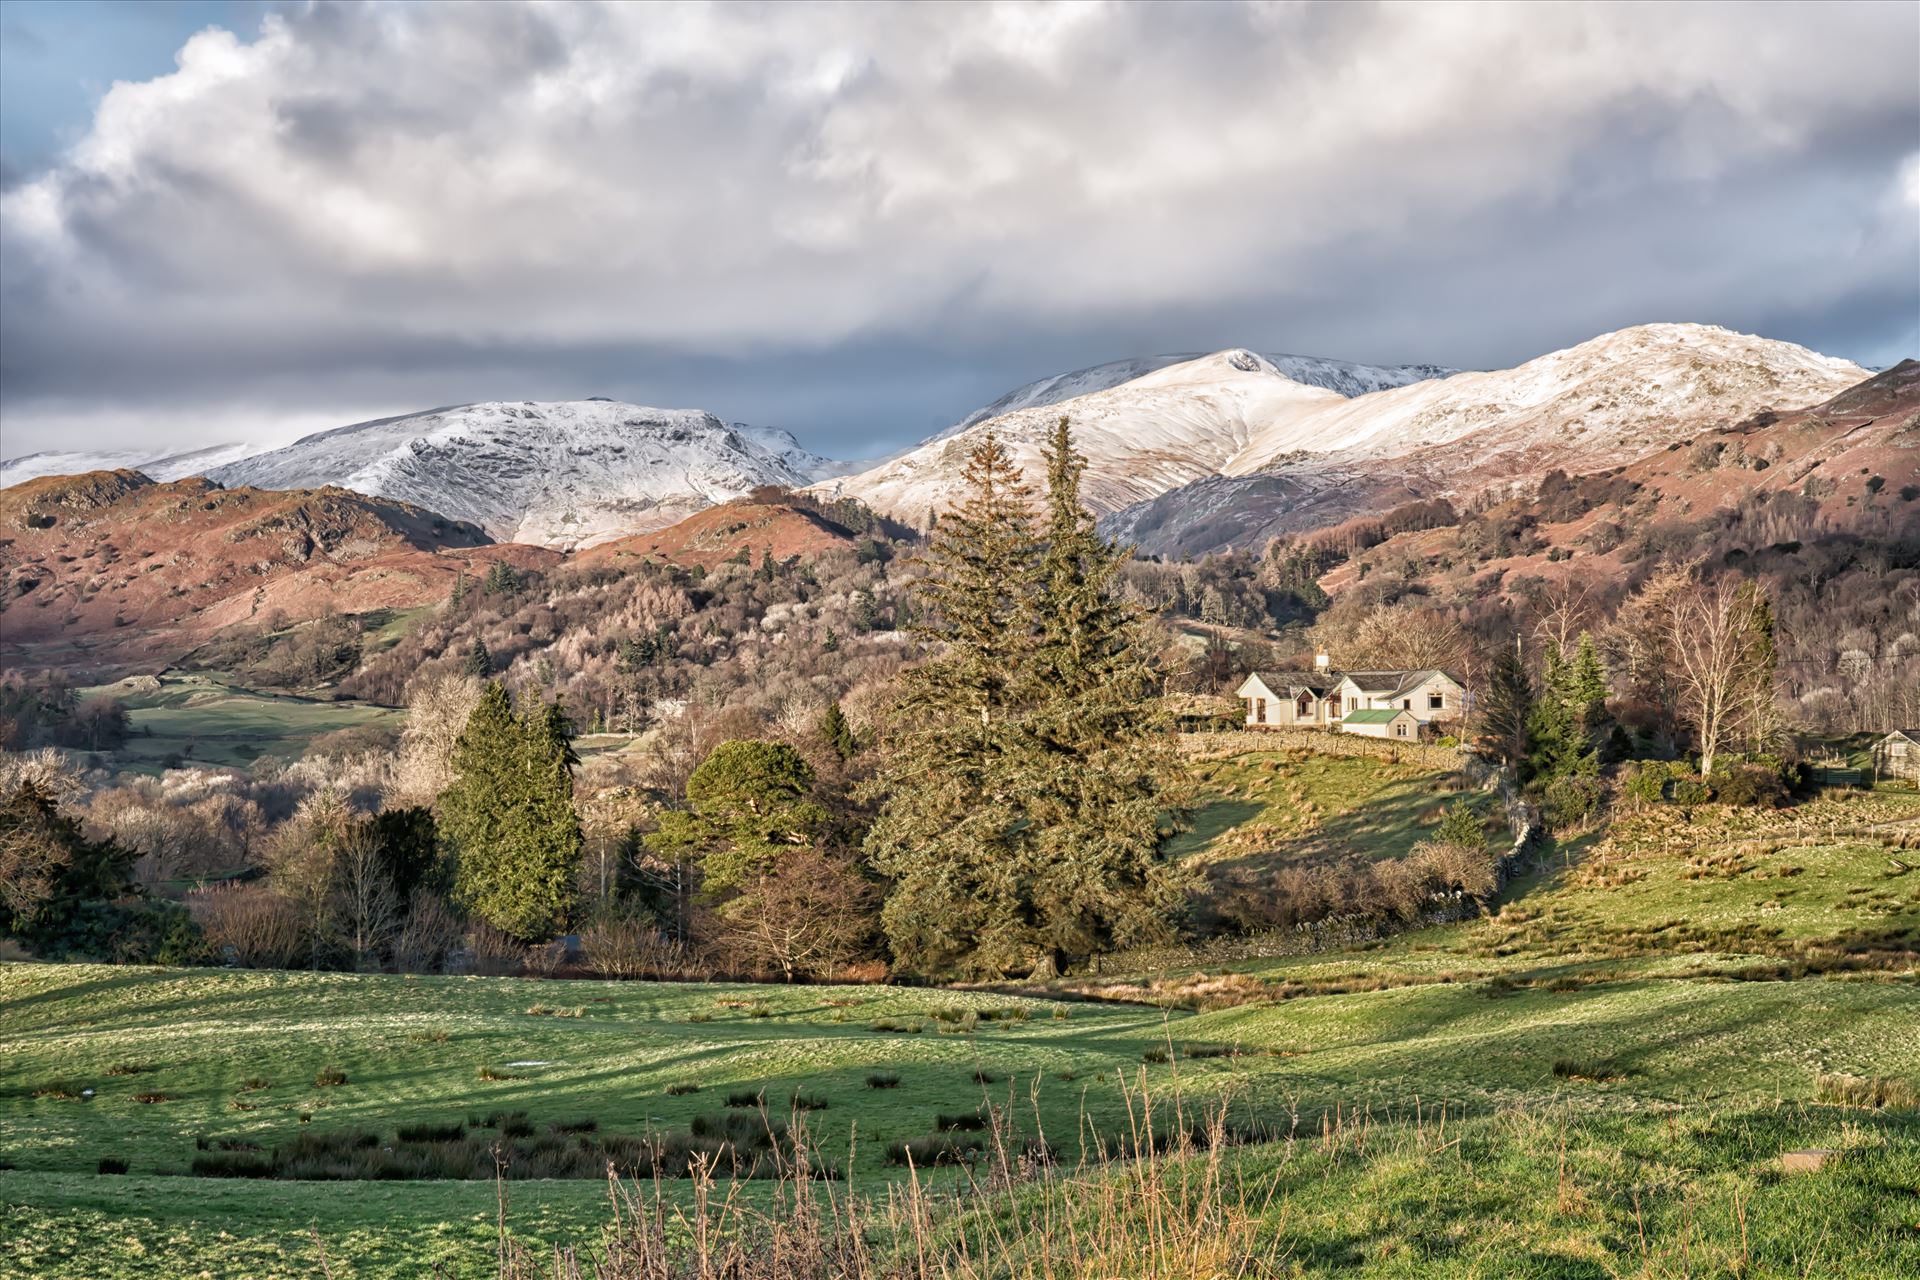 A winters day in the Lakes - A snowy landscape shot taken in the Lake District. by philreay